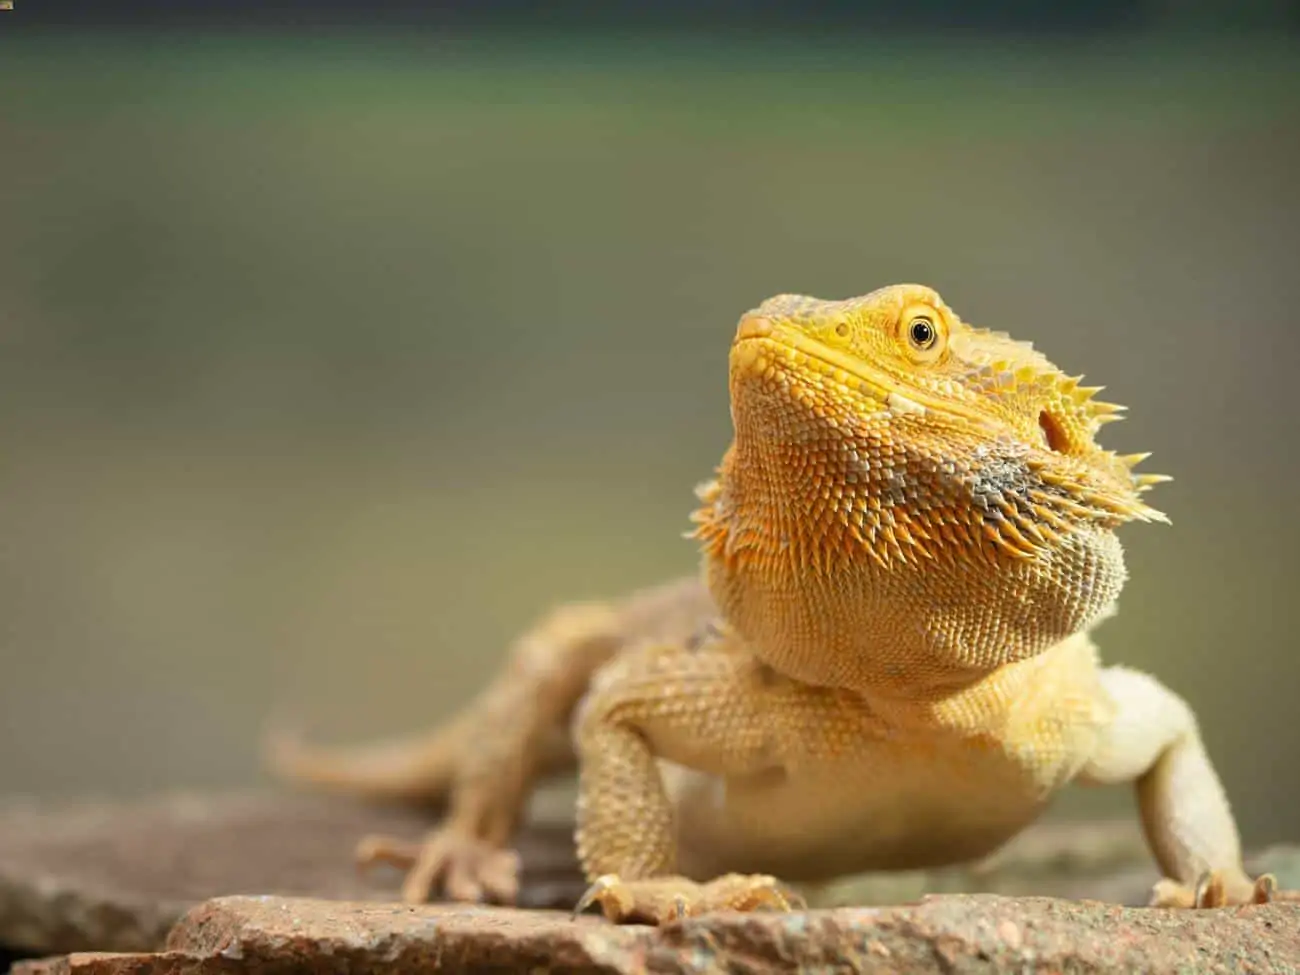 An affordable bearded dragon basking